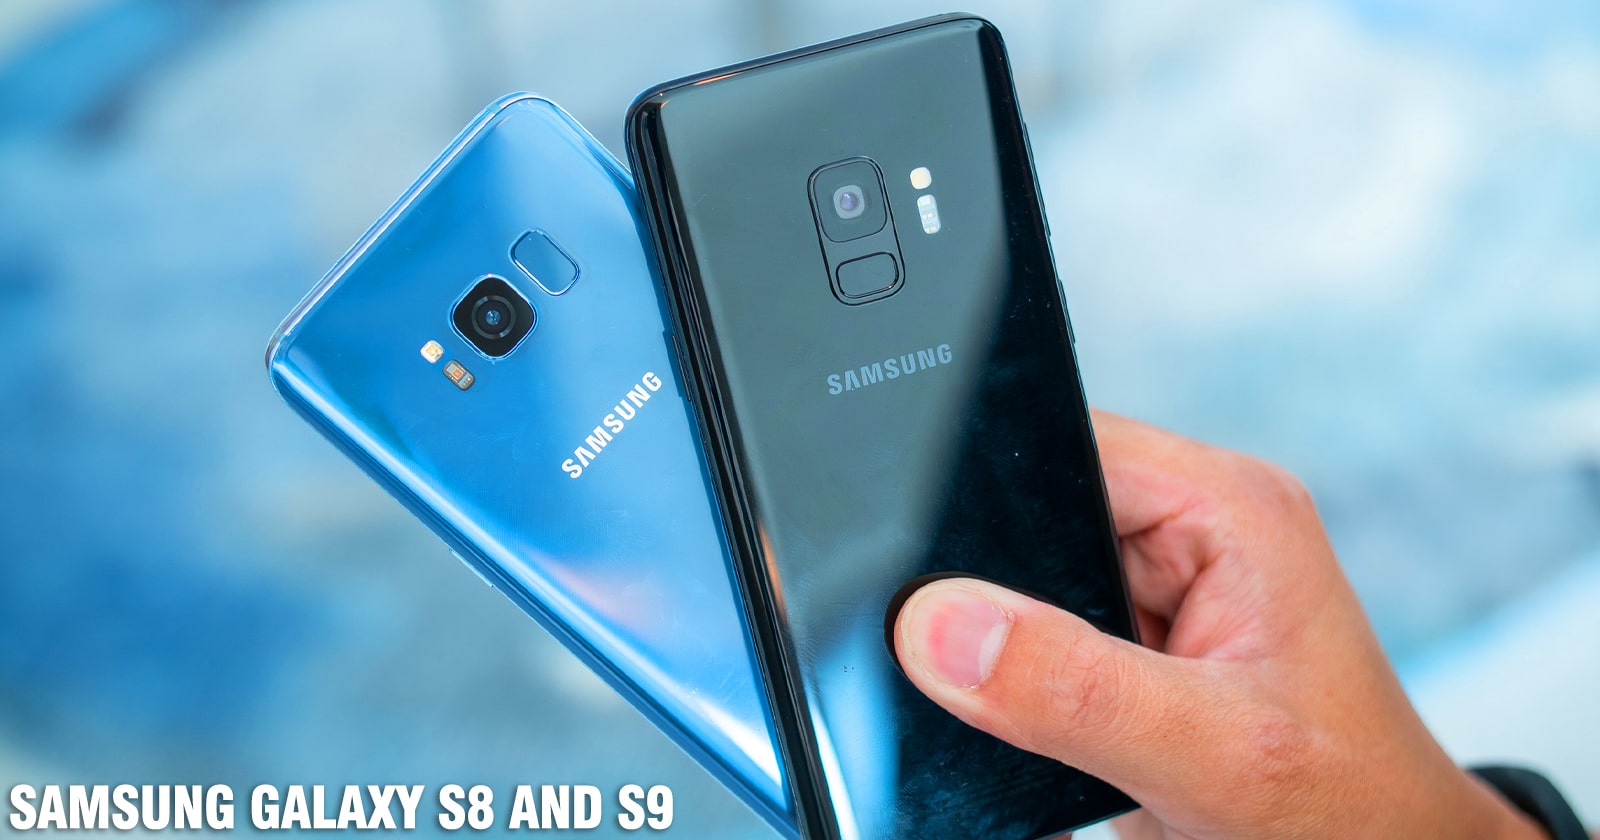 What Is the Difference Between Samsung Galaxy S8 and S9